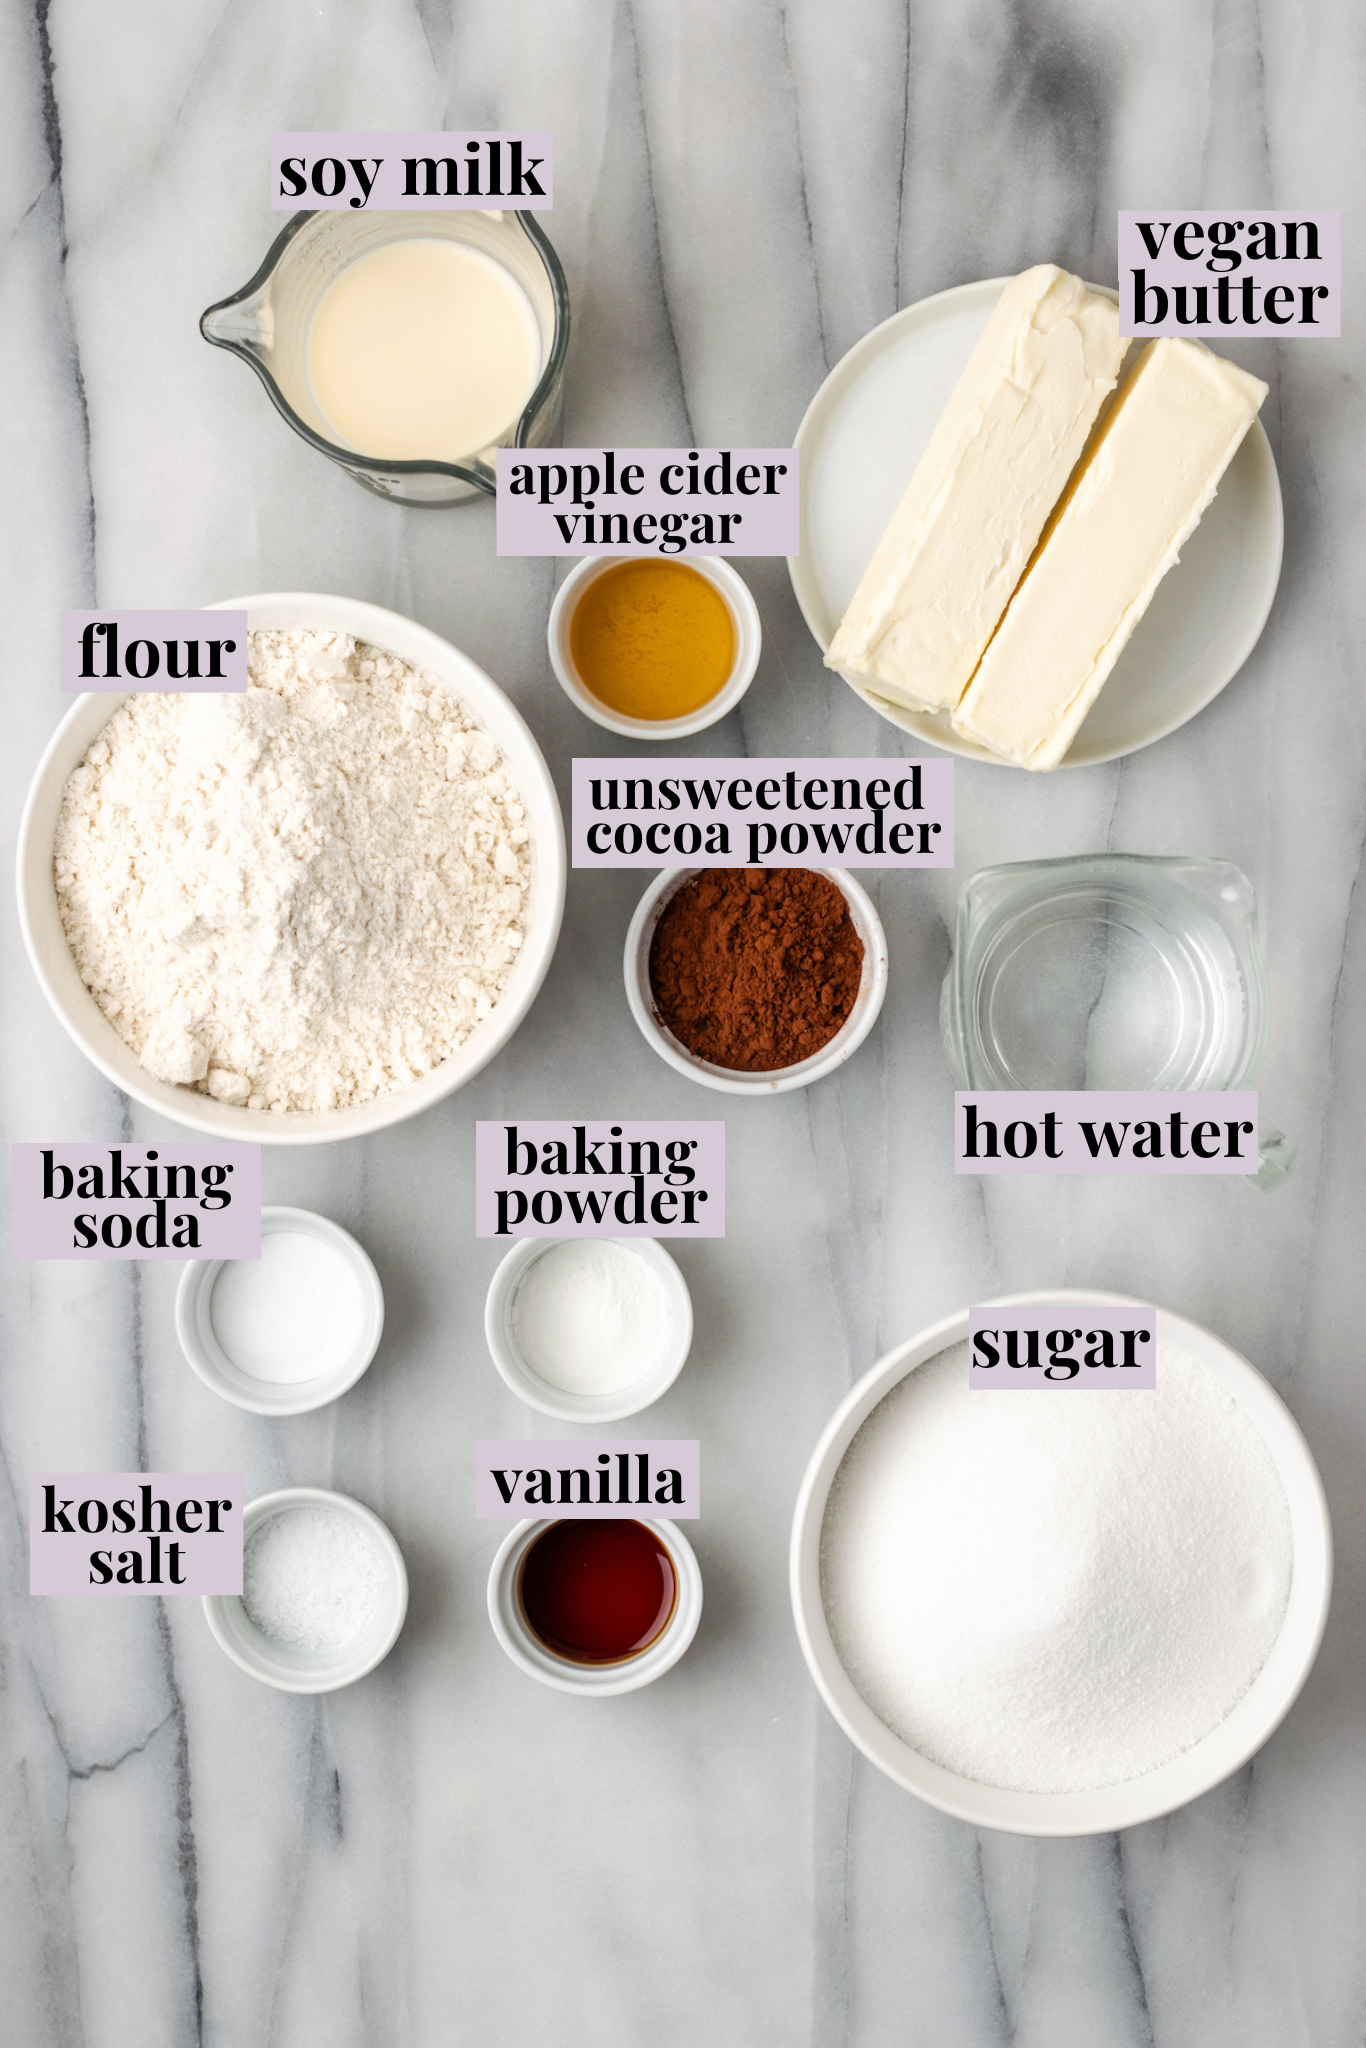 Overhead view of ingredients for Texas sheet cake with labels